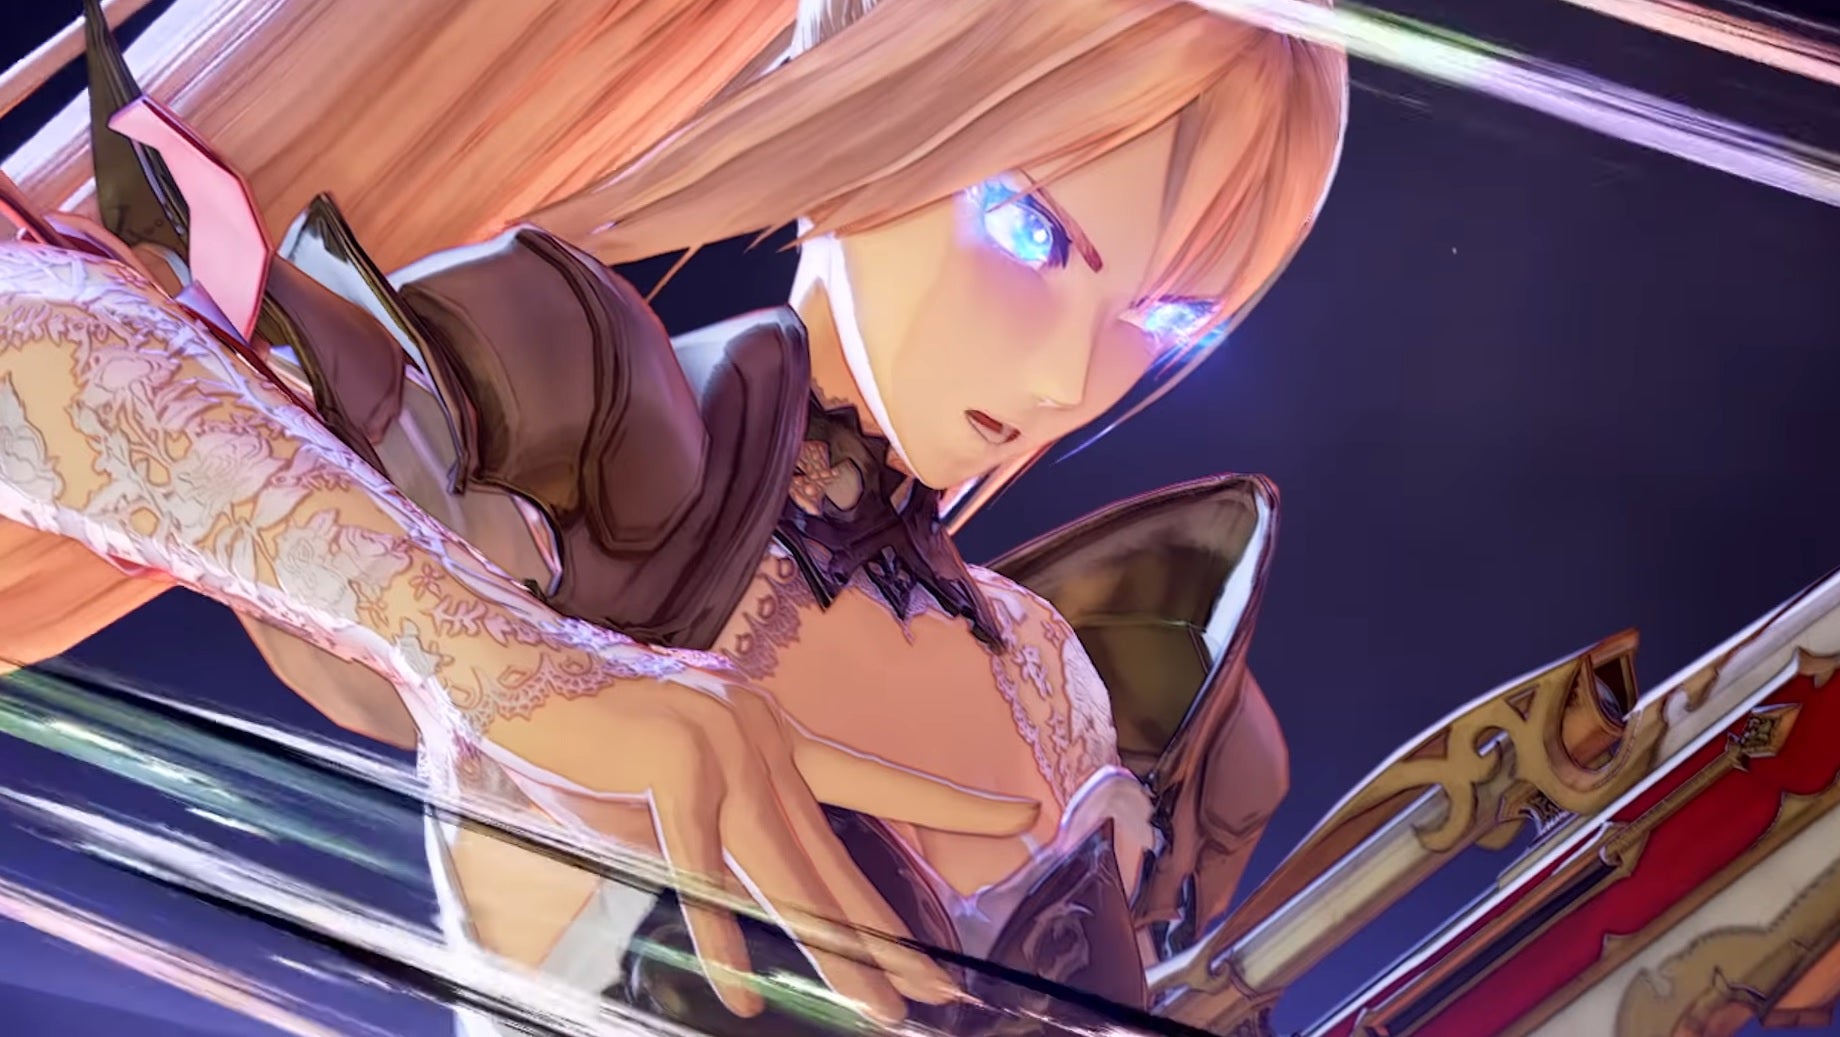 tales Of Arise - Shionne with glowing blue eyes preparing to attack.